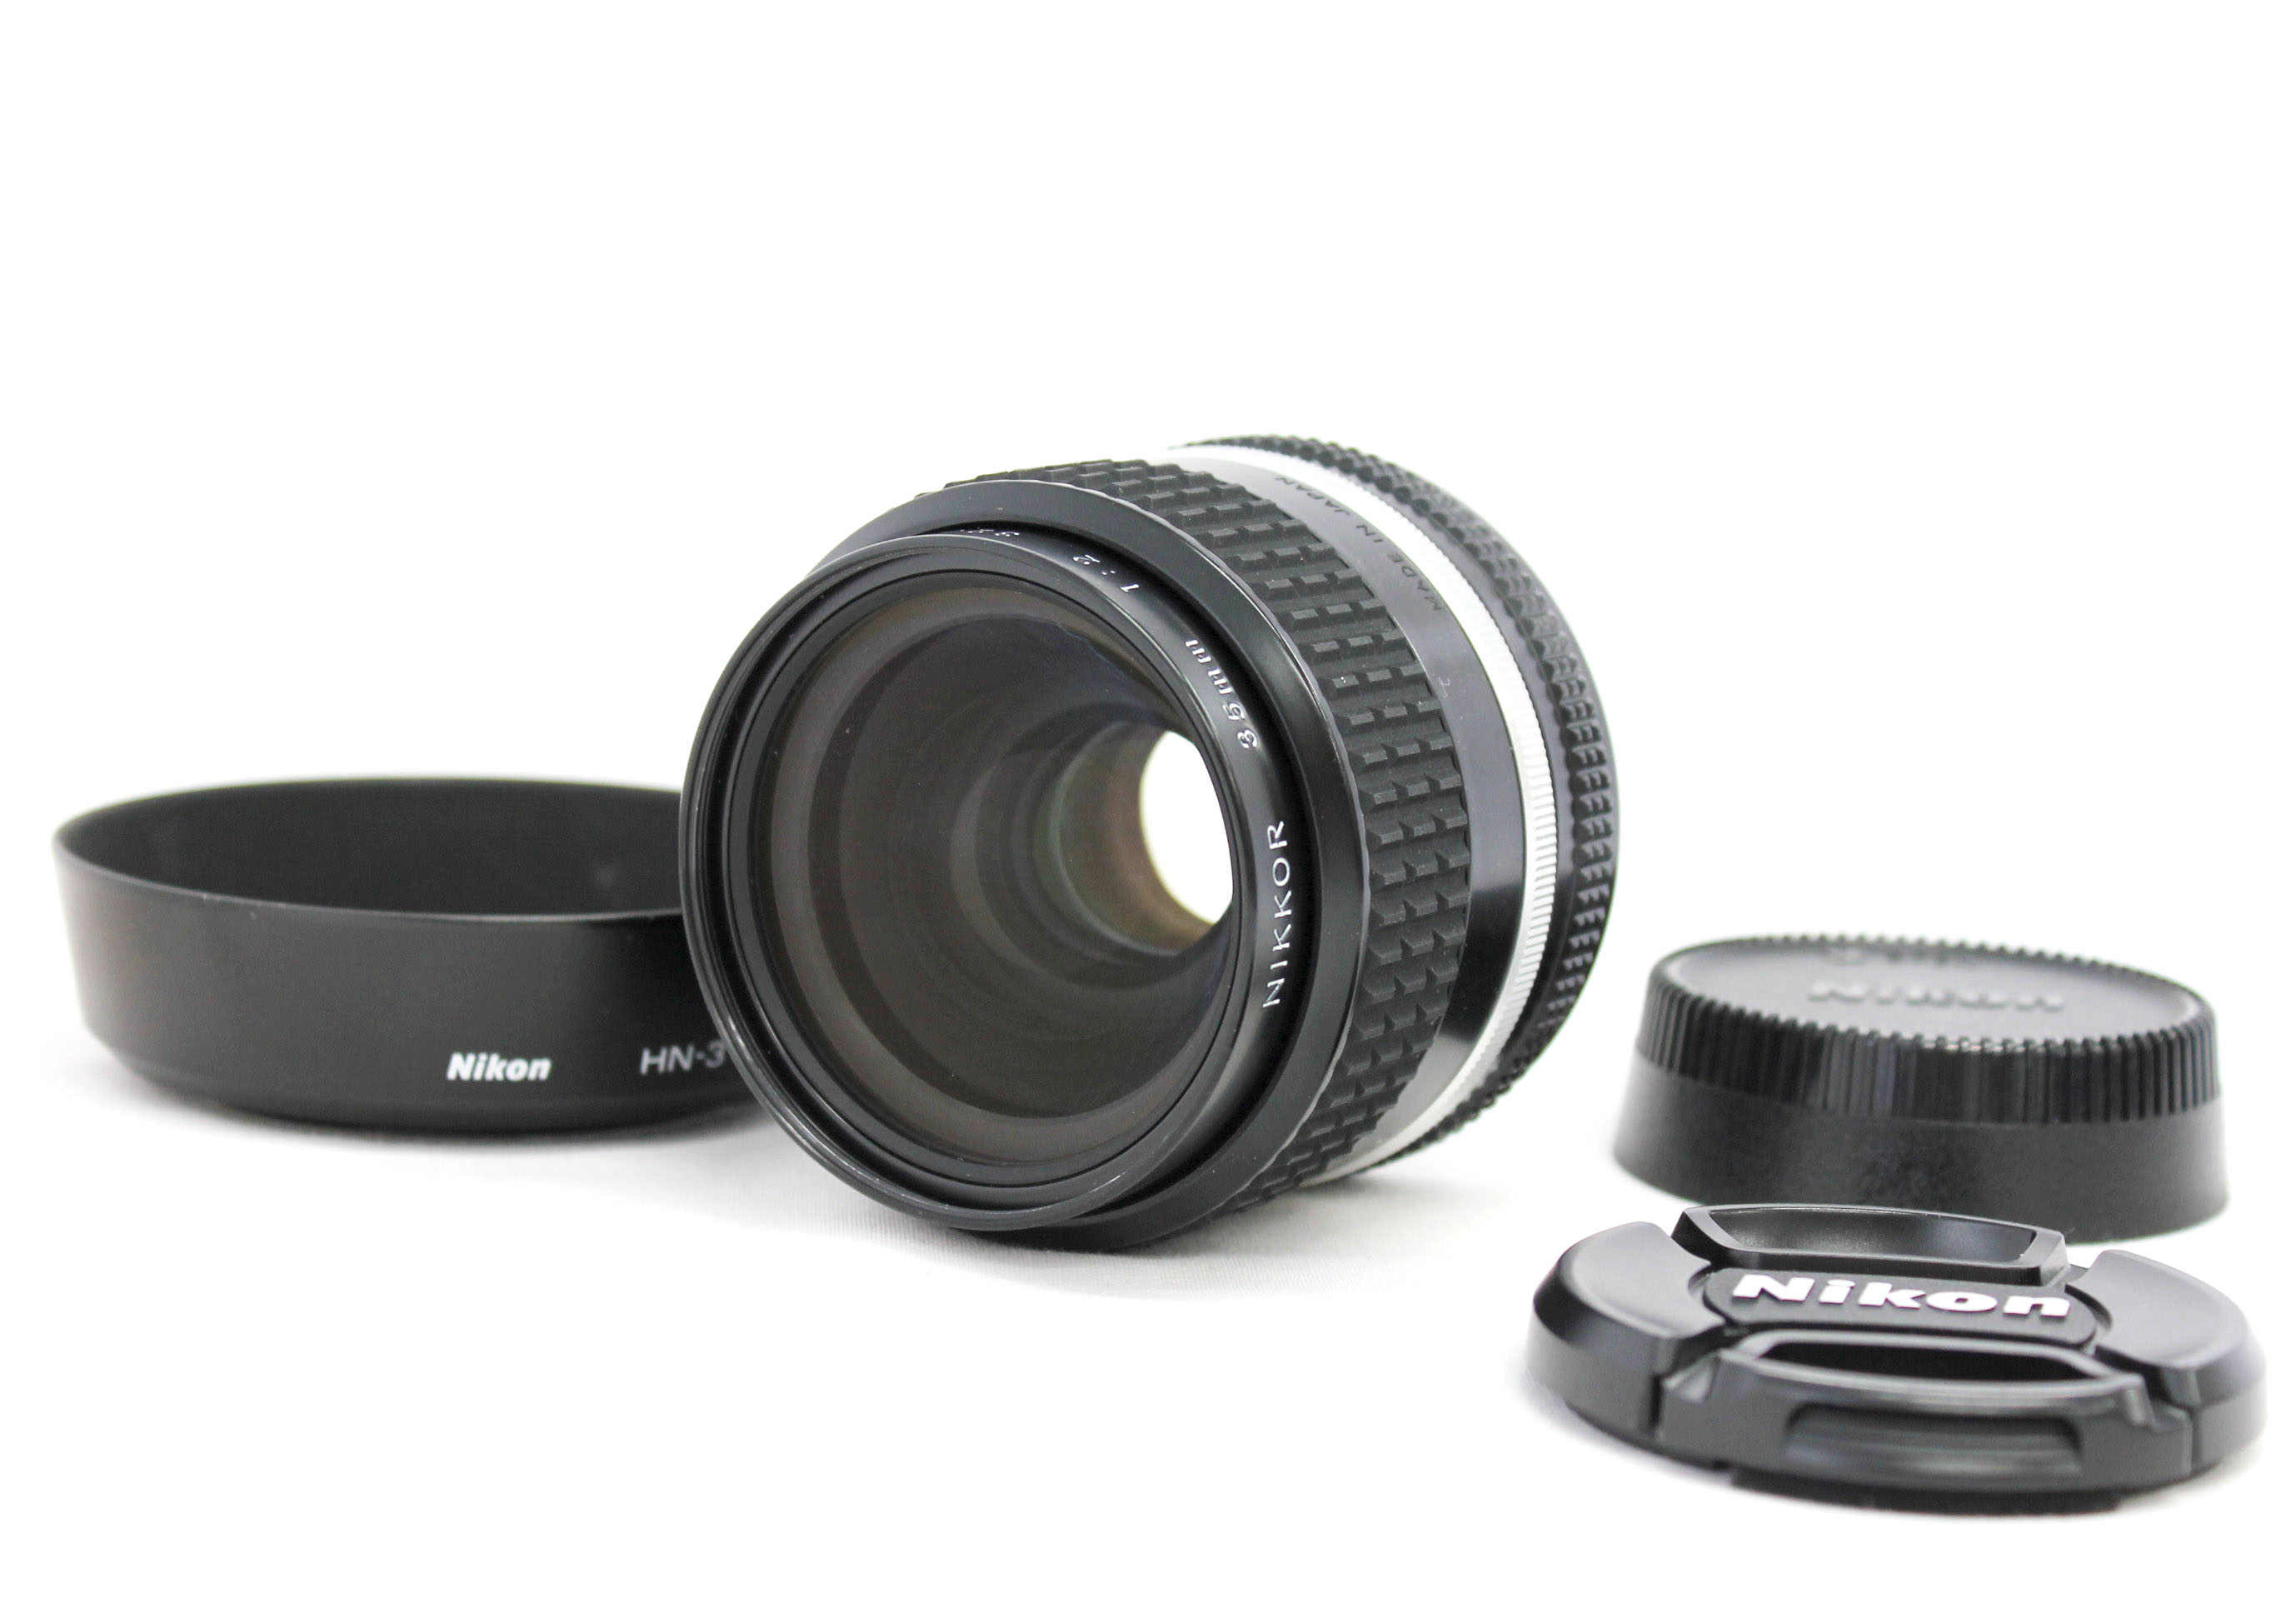 Nikon Ai-s Ais Nikkor 35mm F/2 Wide Angle MF Lens S/N32* SIC Version with Hood HN-3 from Japan